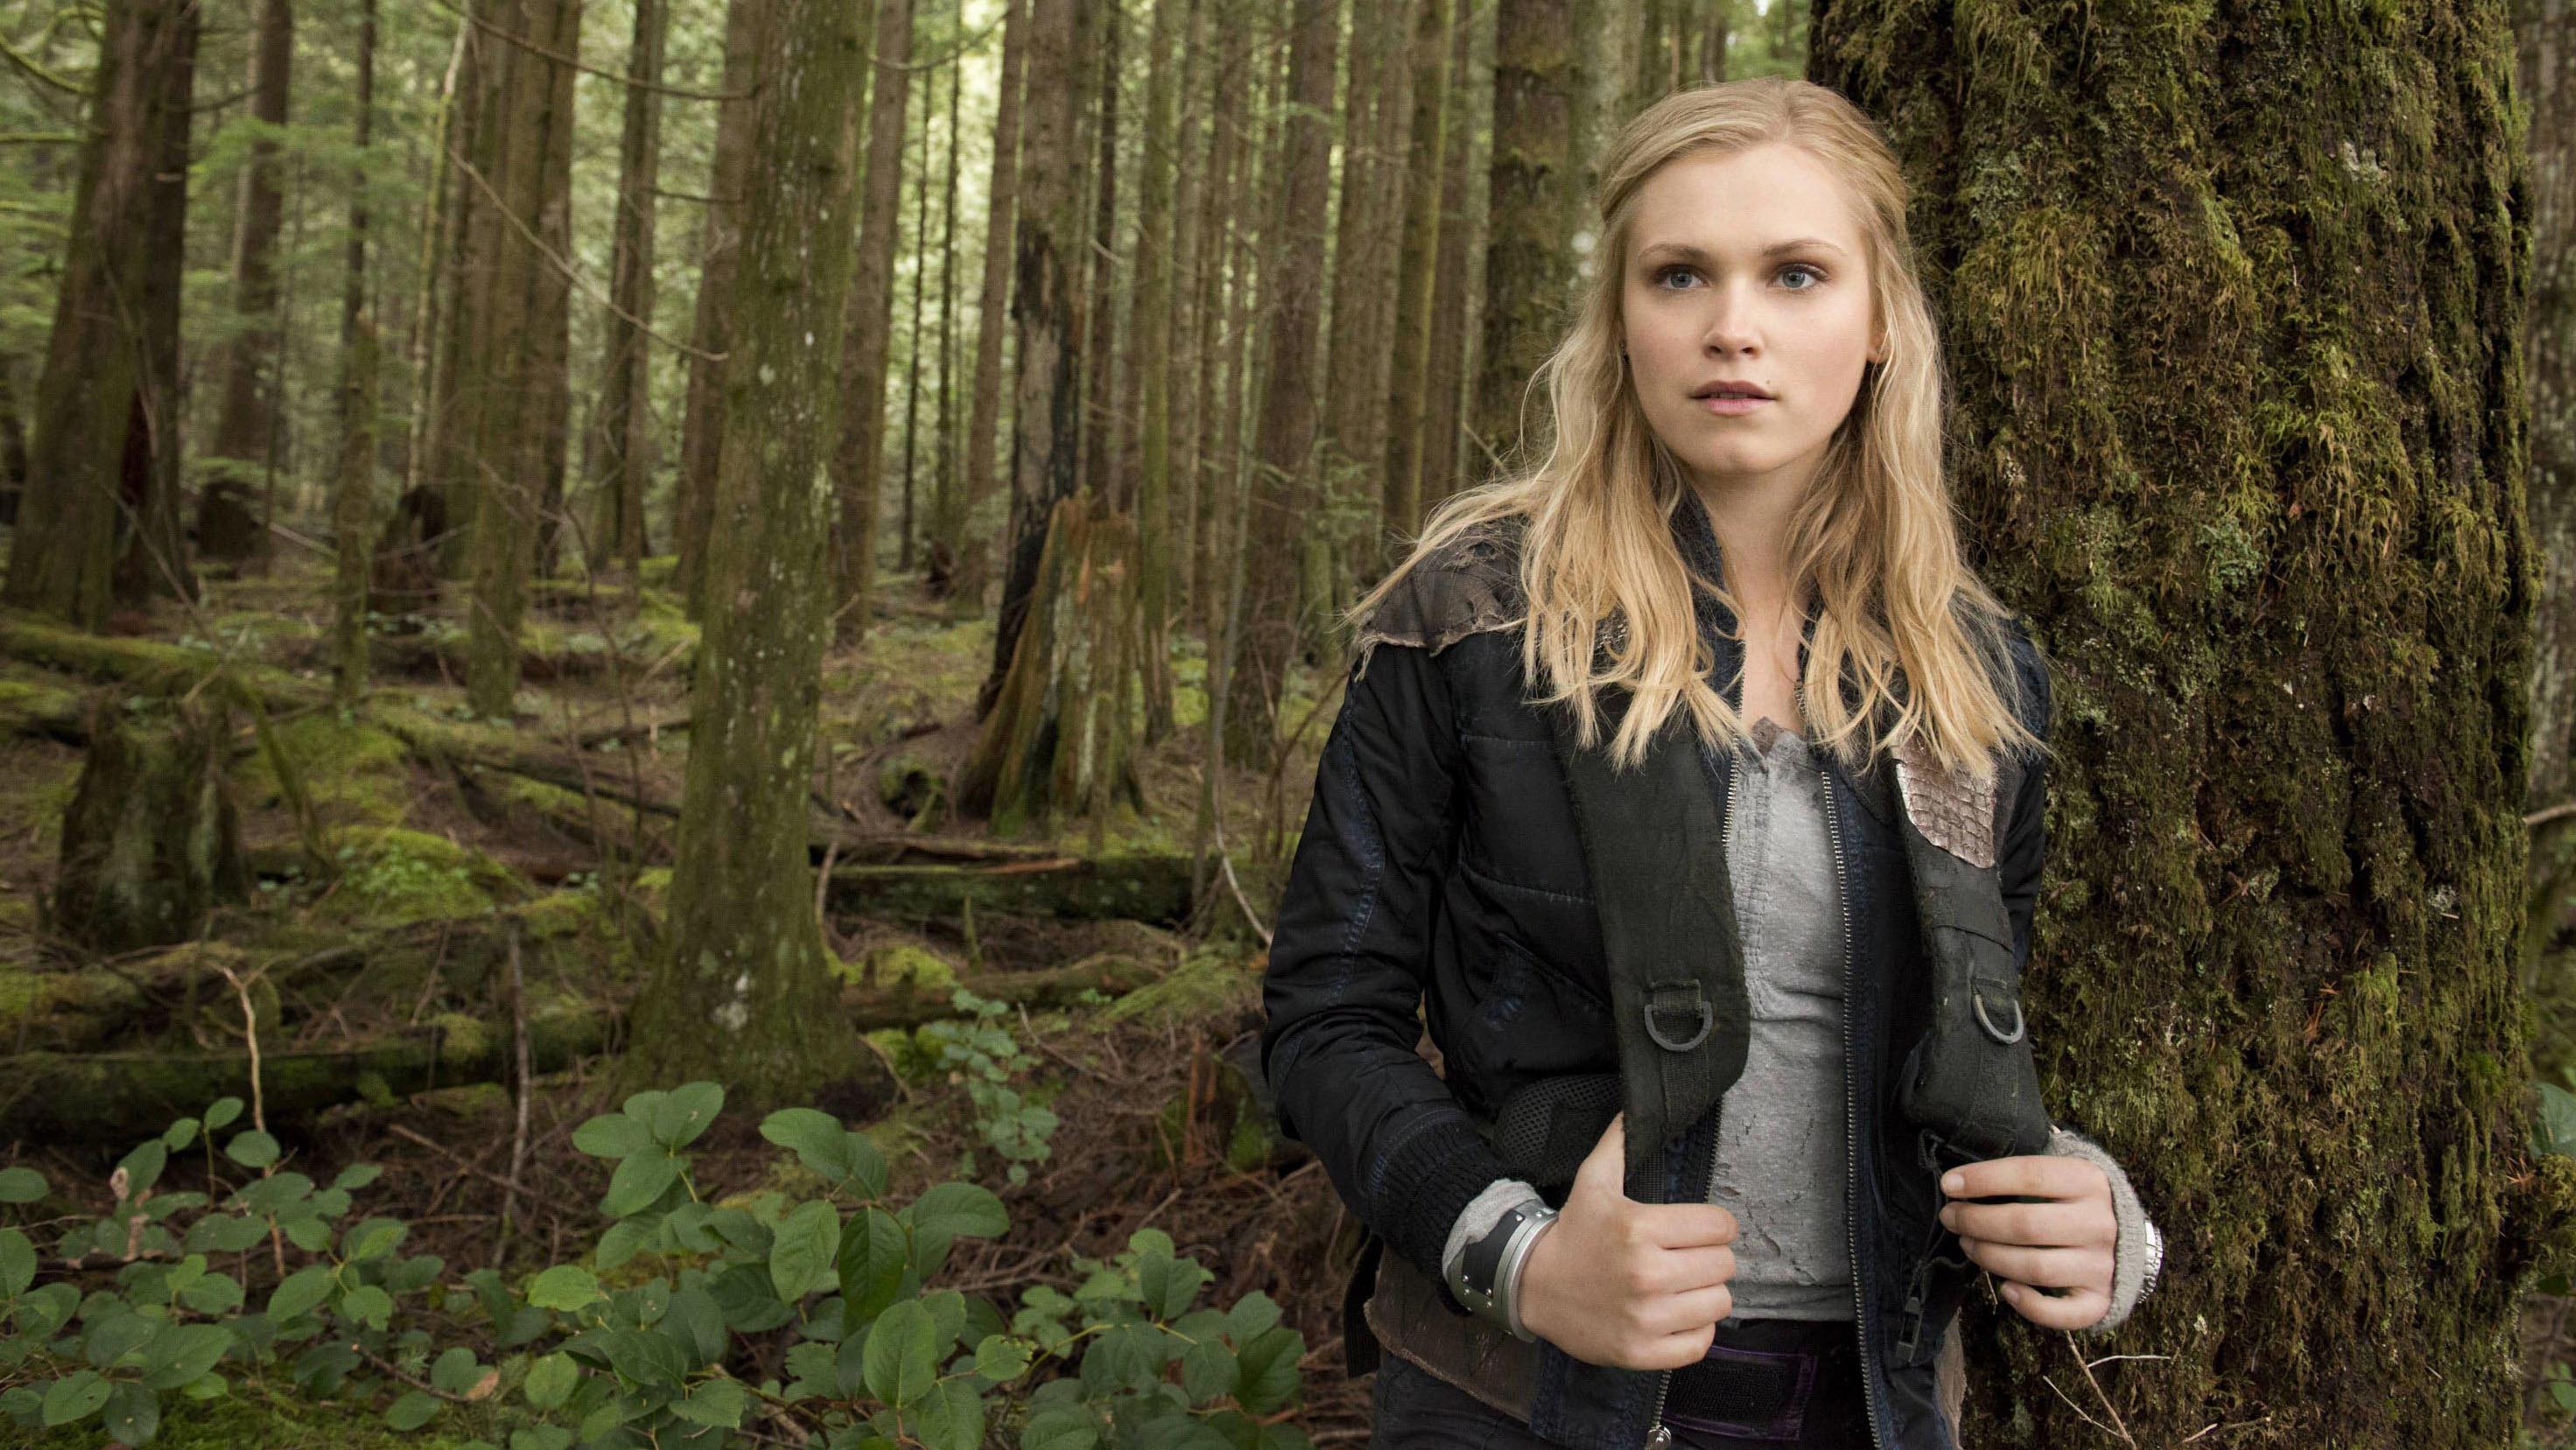 Awesome Eliza Taylor Wallpaper Full HD Pictures